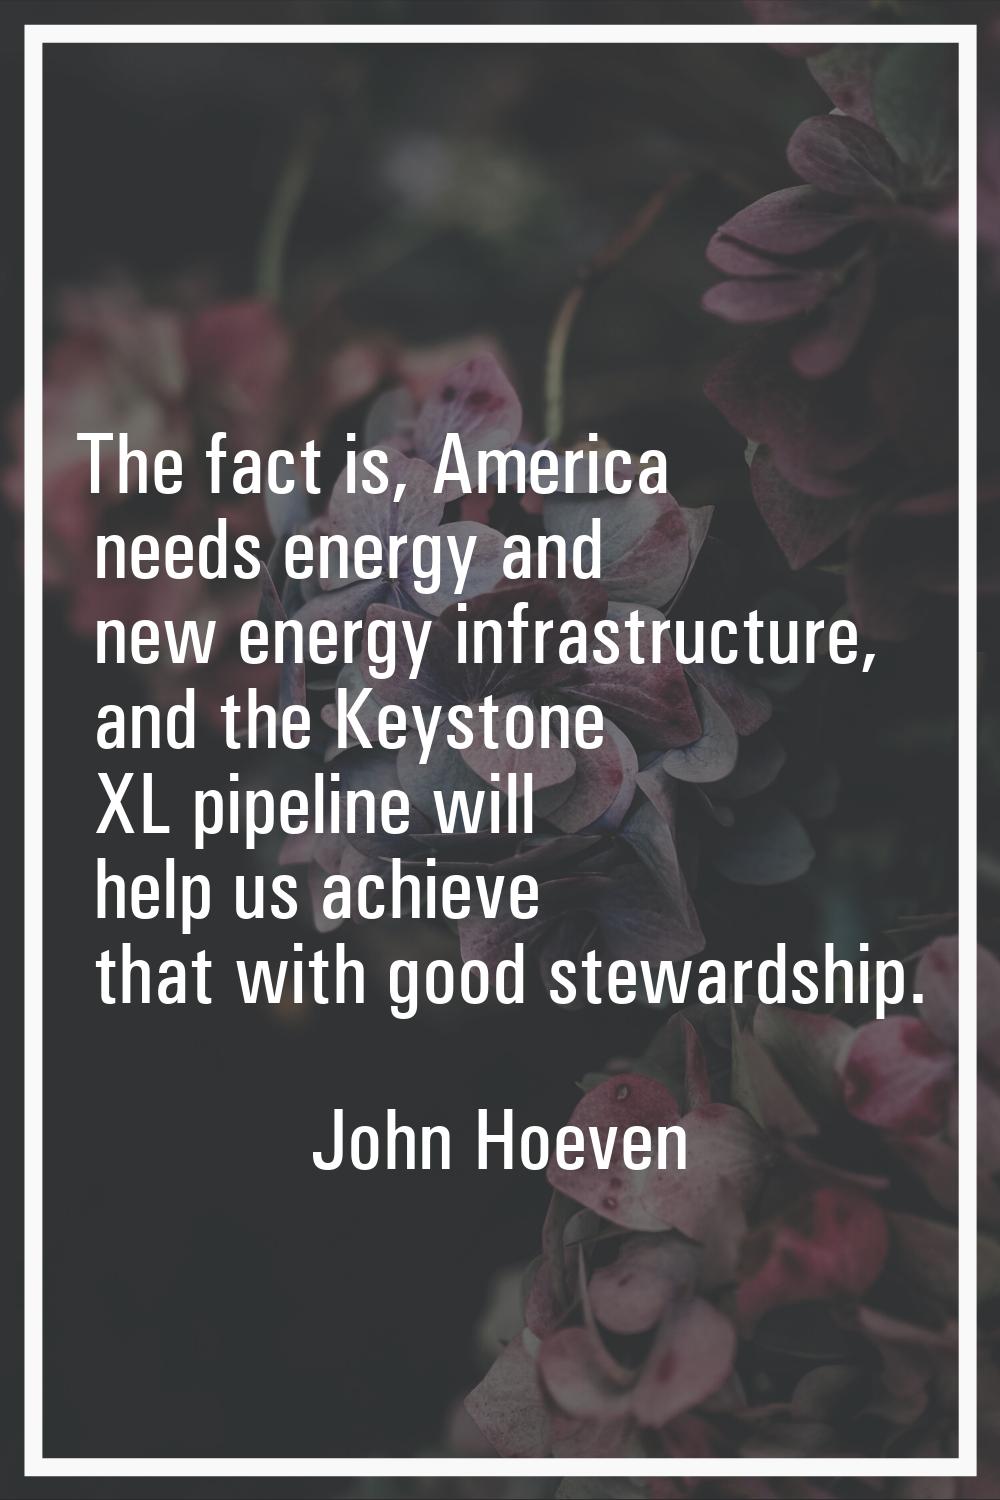 The fact is, America needs energy and new energy infrastructure, and the Keystone XL pipeline will 